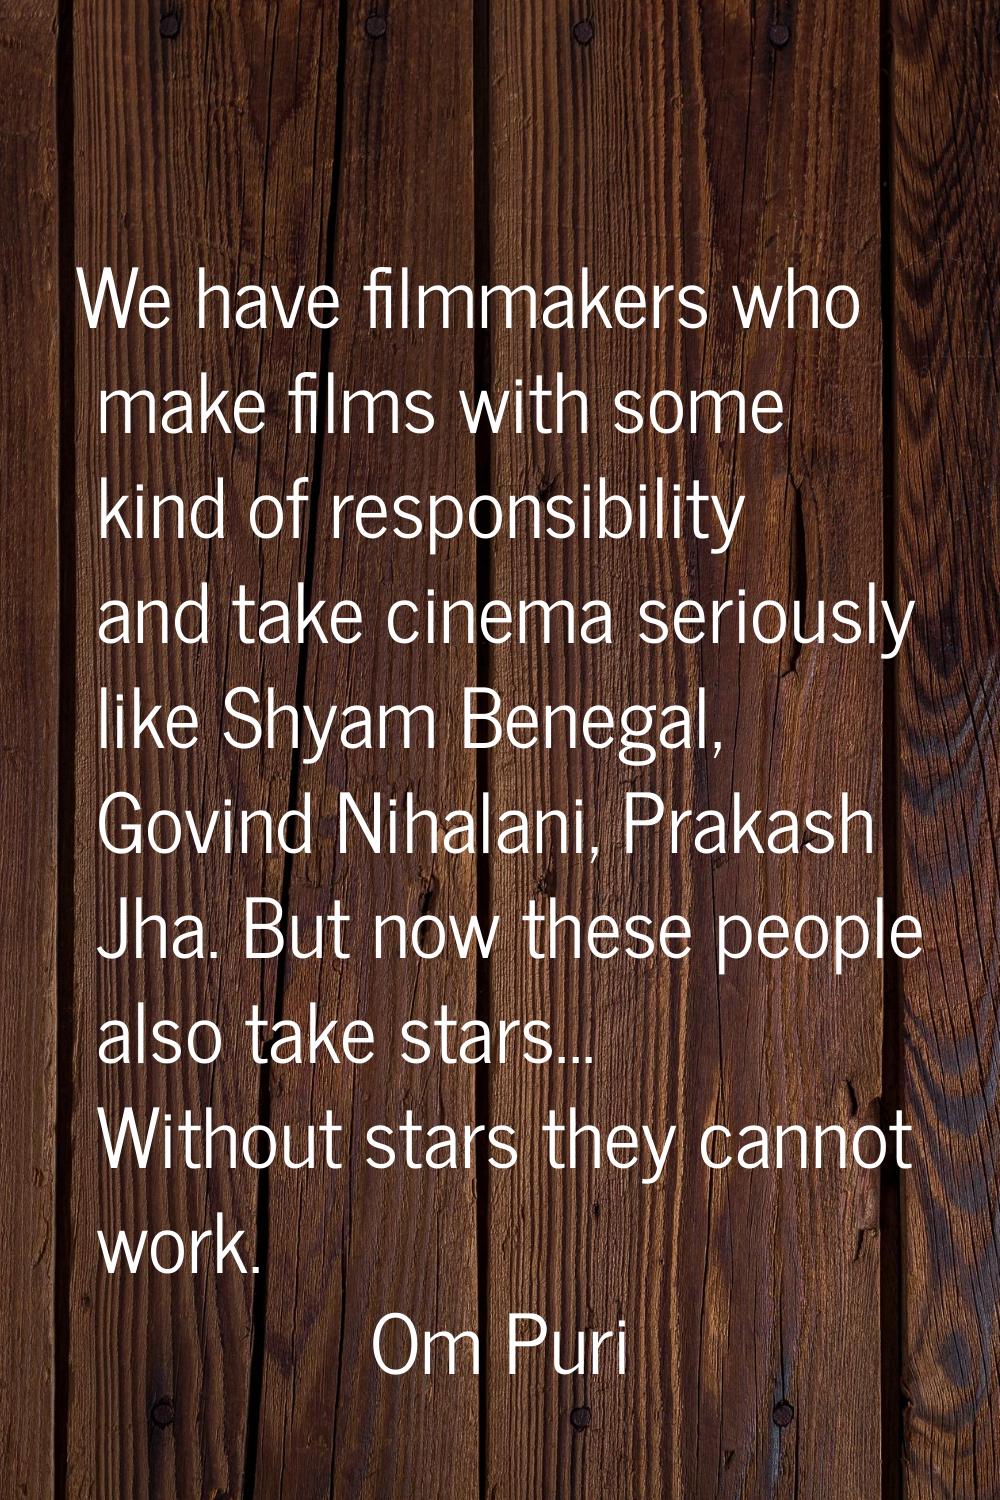 We have filmmakers who make films with some kind of responsibility and take cinema seriously like S